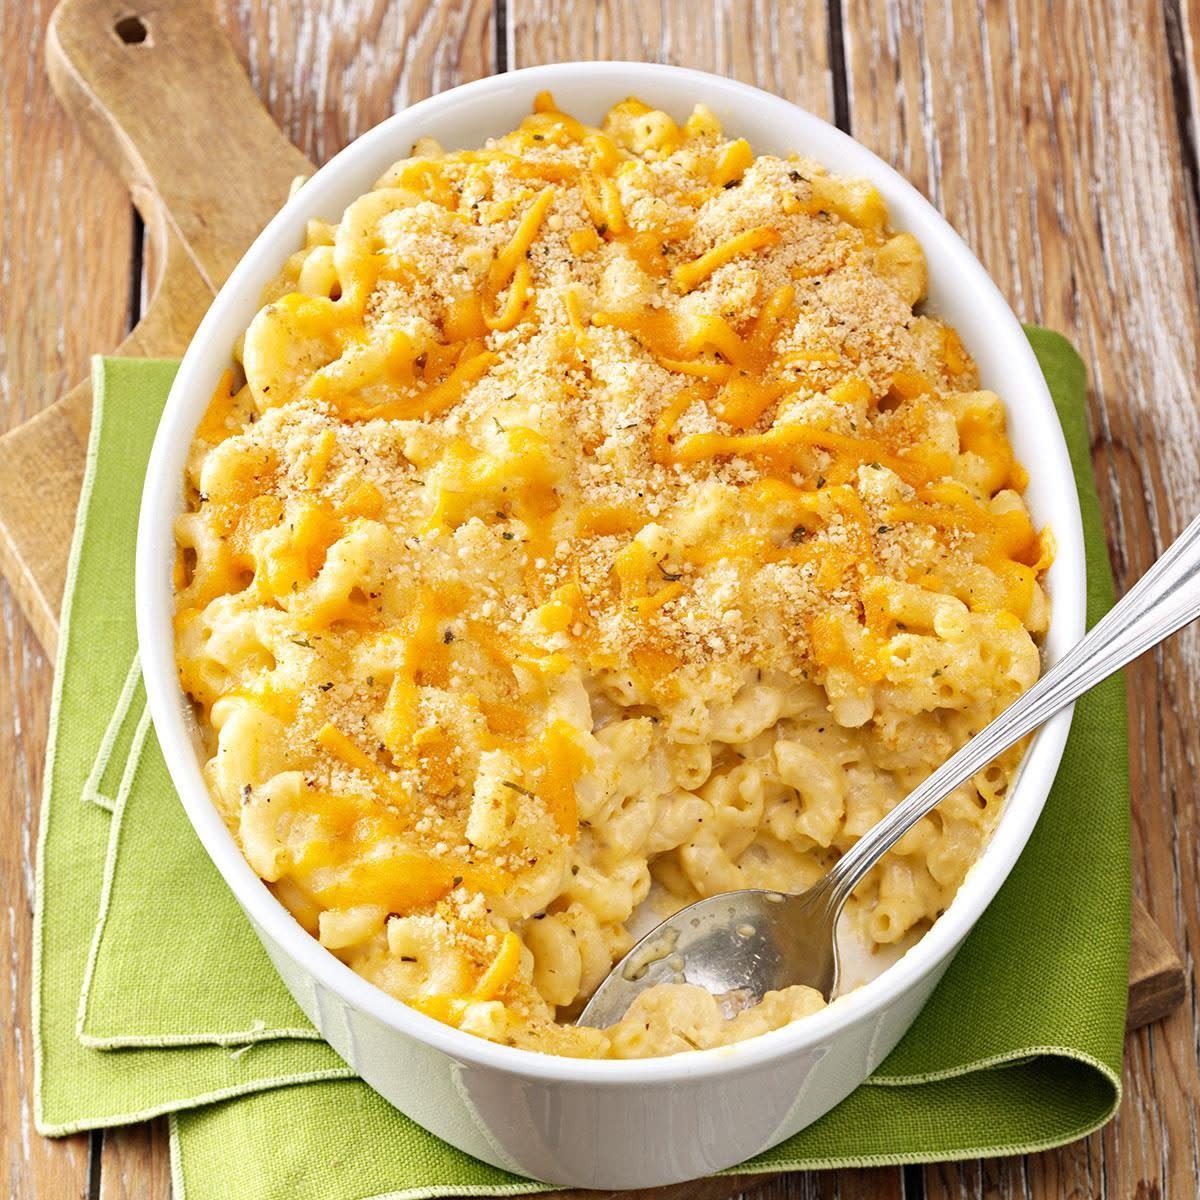 Warm-up the House With Homemade Macaroni and Cheese Casserole